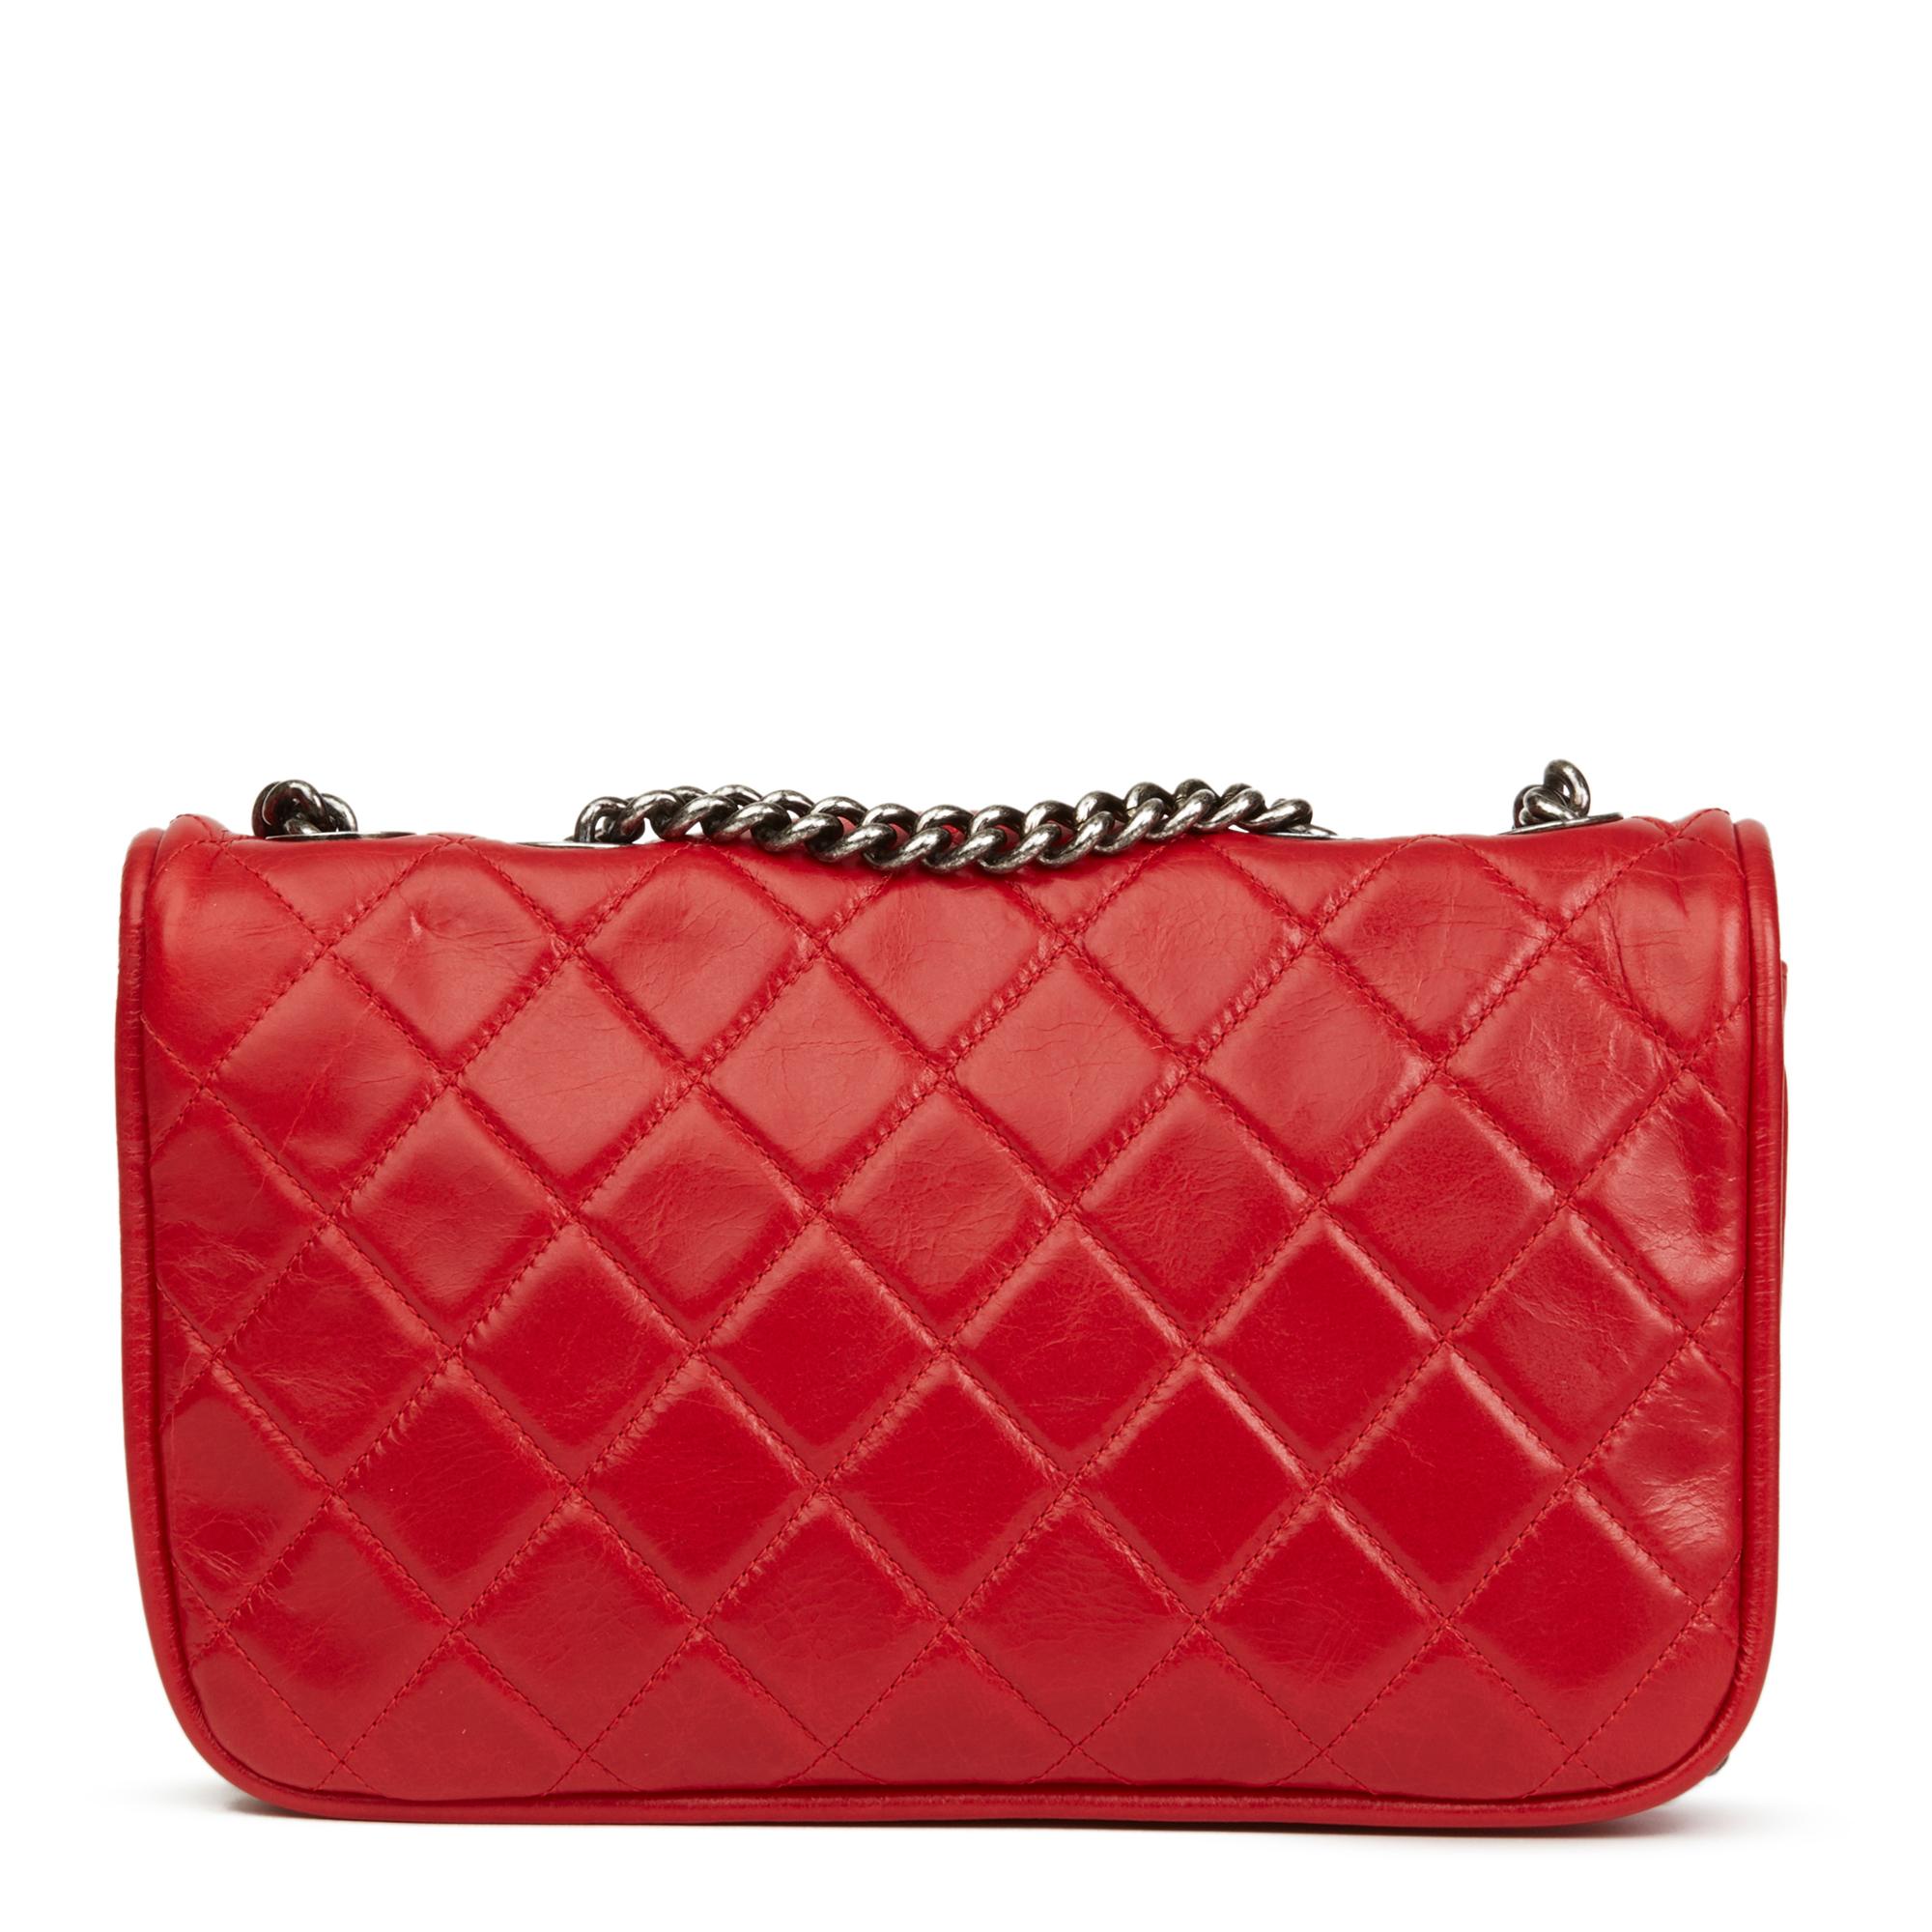 Women's 2014 Chanel Red Quilted Aged Calfskin Leather Single Flap Bag